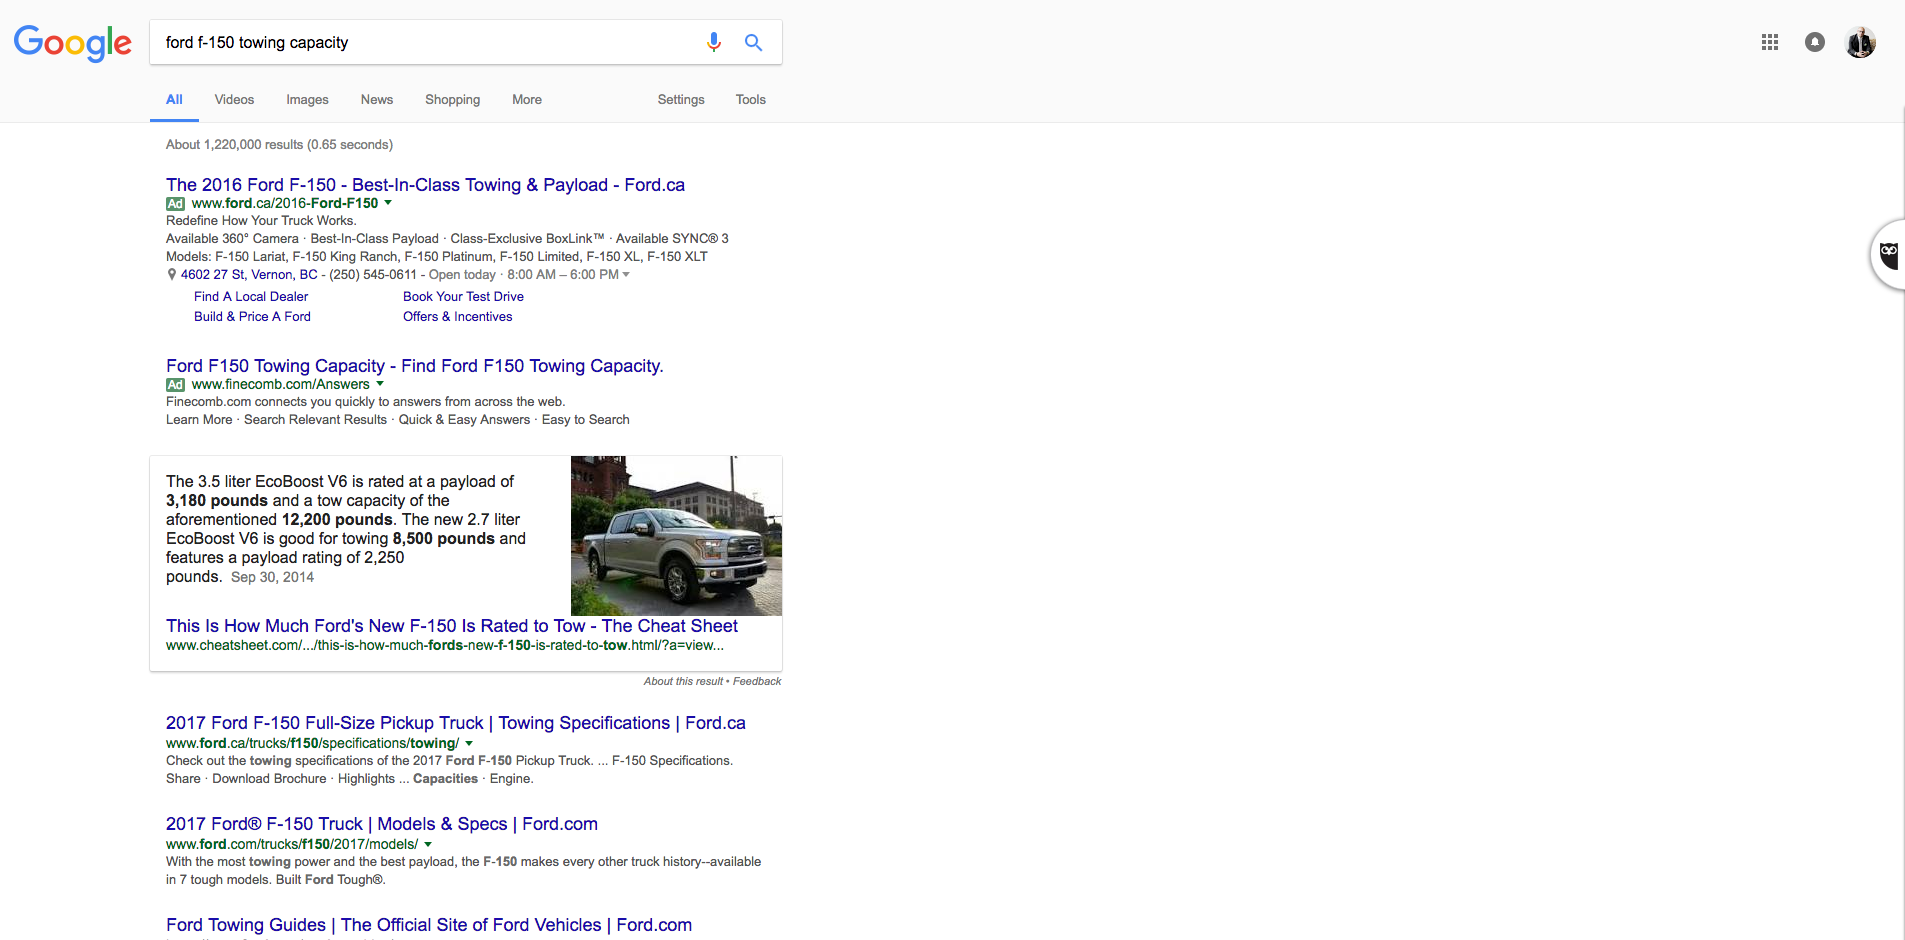 Ford F-150 search results